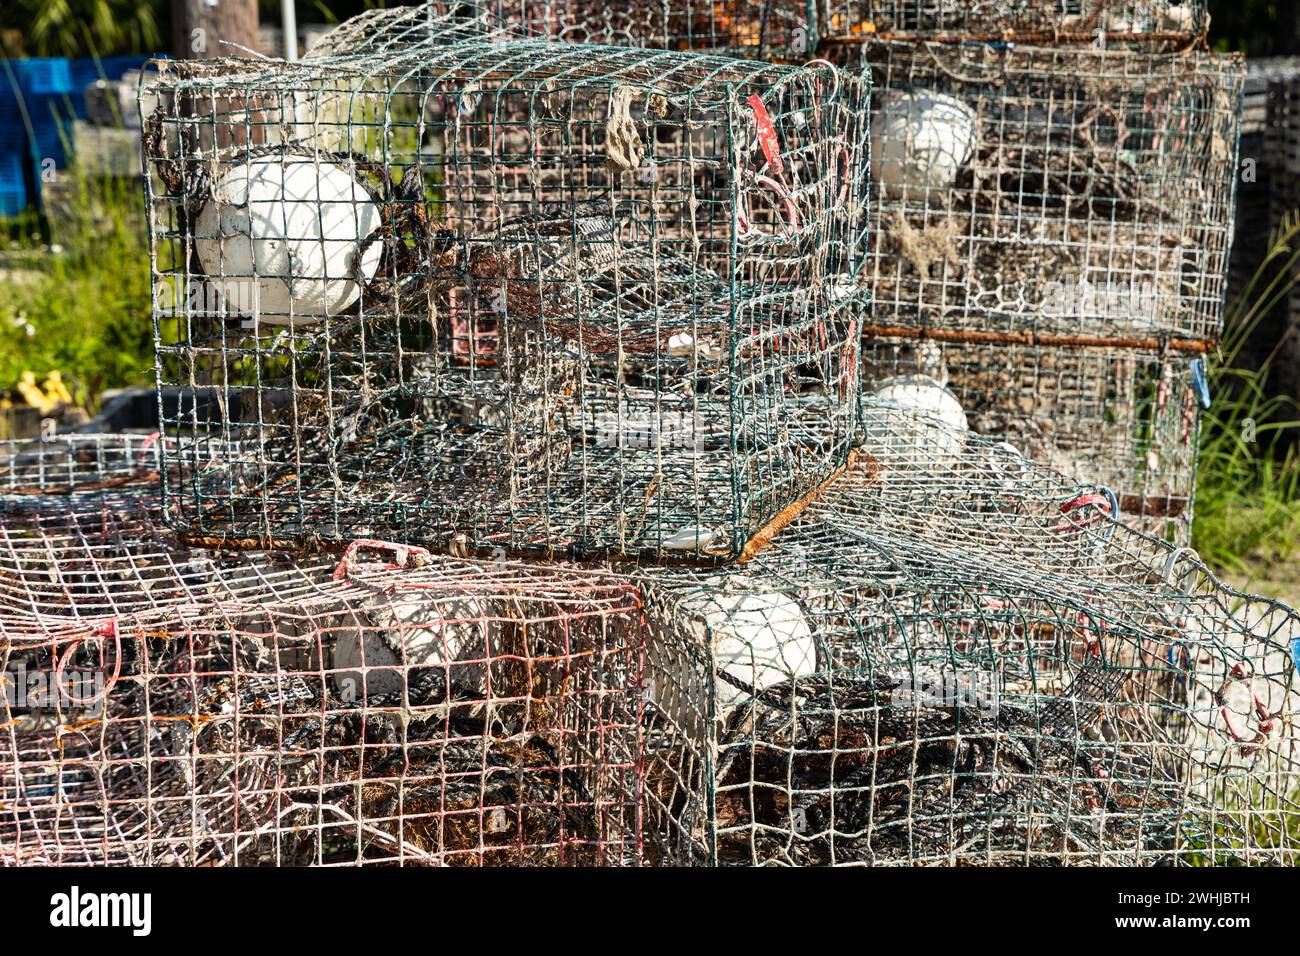 Crab trap boxes in Florida Stock Photo